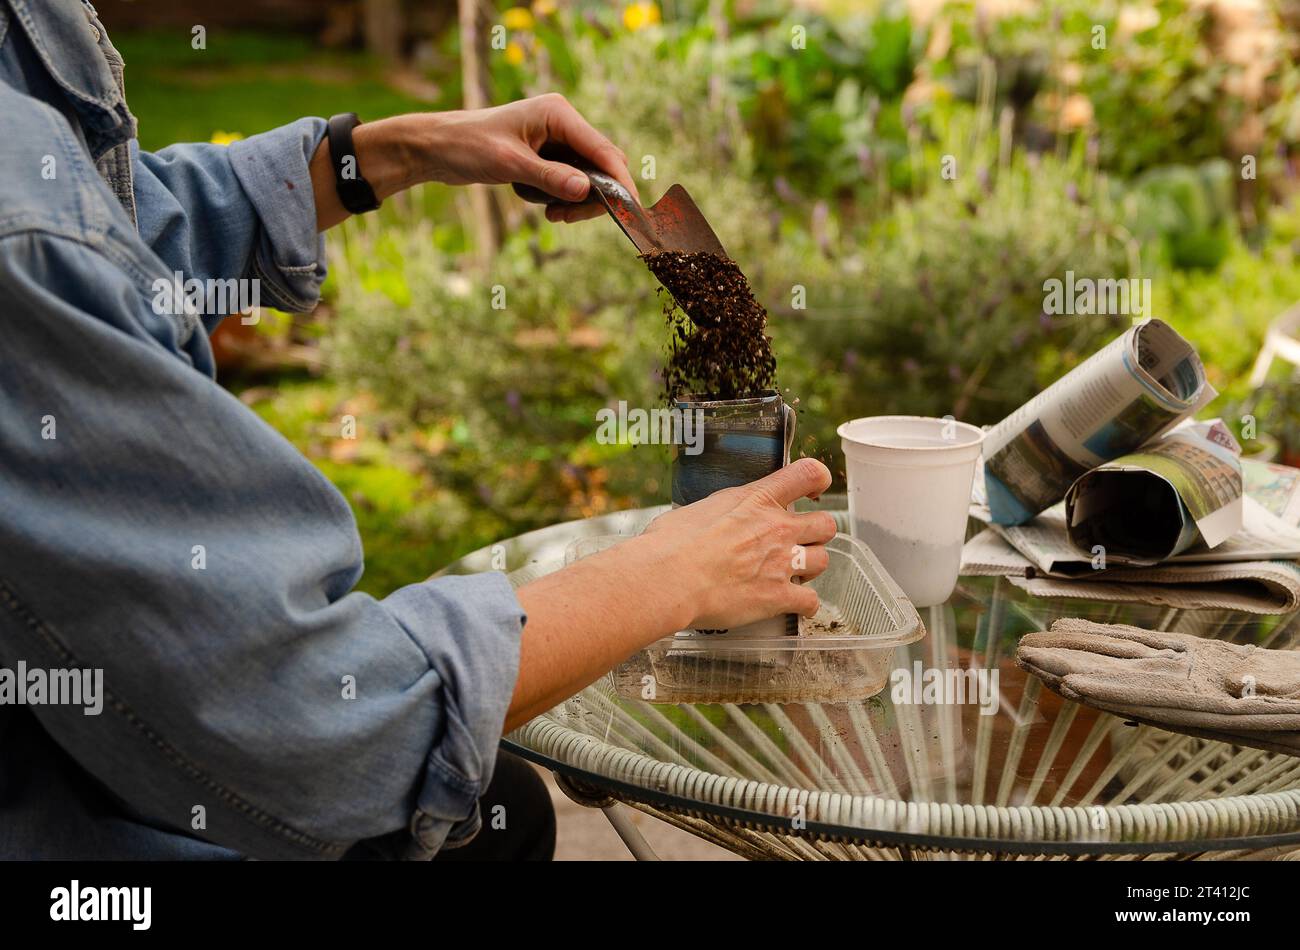 Gardening with recycled material. A woman filling pots made of newspaper sheets in the garden. Stock Photo